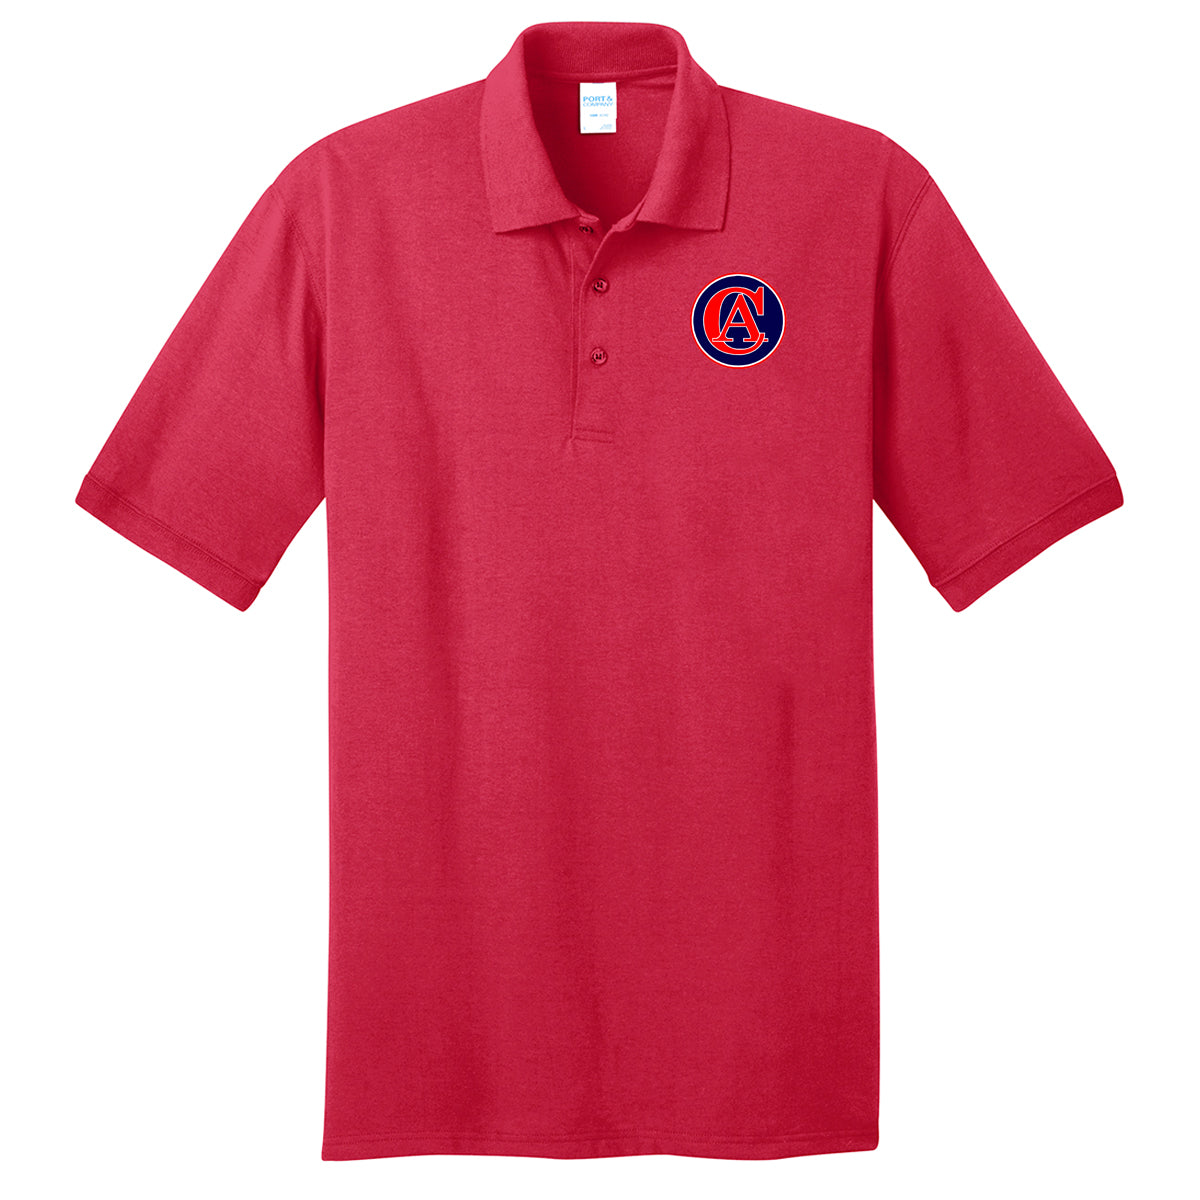 Covenant - Adult Polo - Red (KP55) - Southern Grace Creations